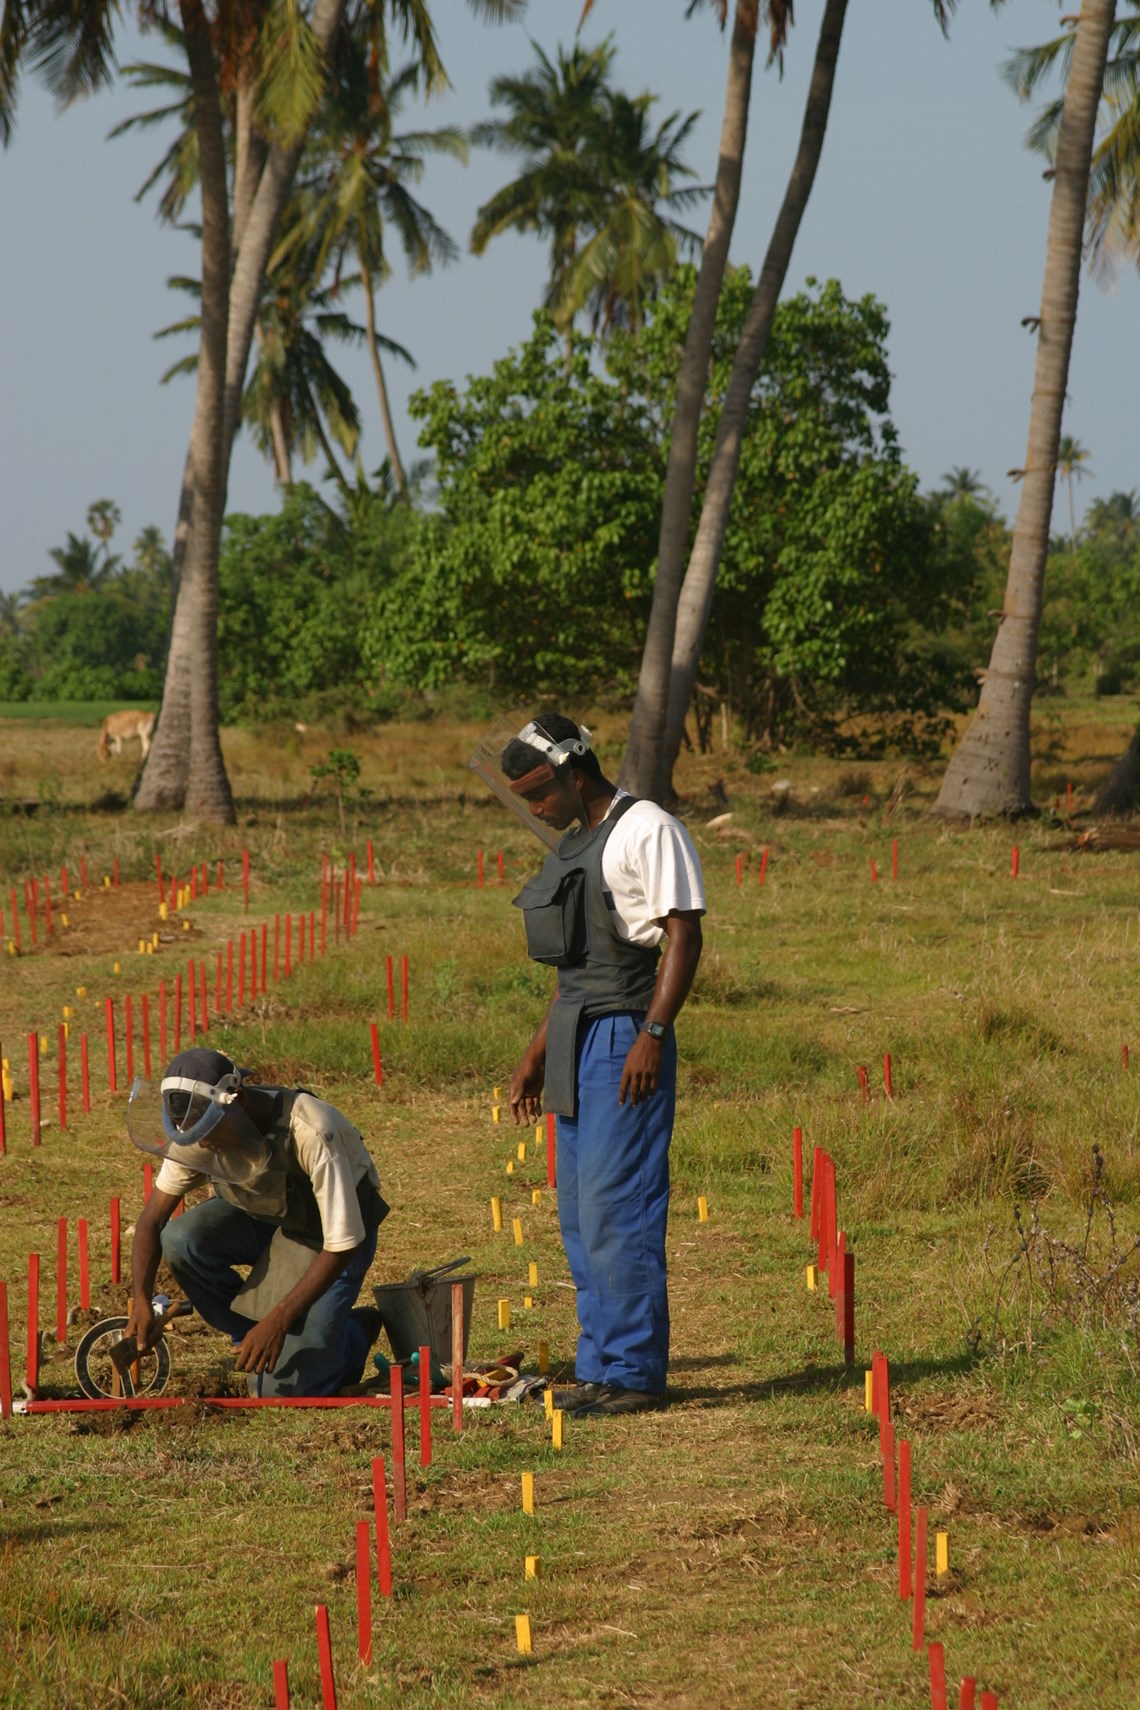 Sri Lanka is one of the most densely mined countries in the world. Since 2002 HALO has removed over 200,000 mines.